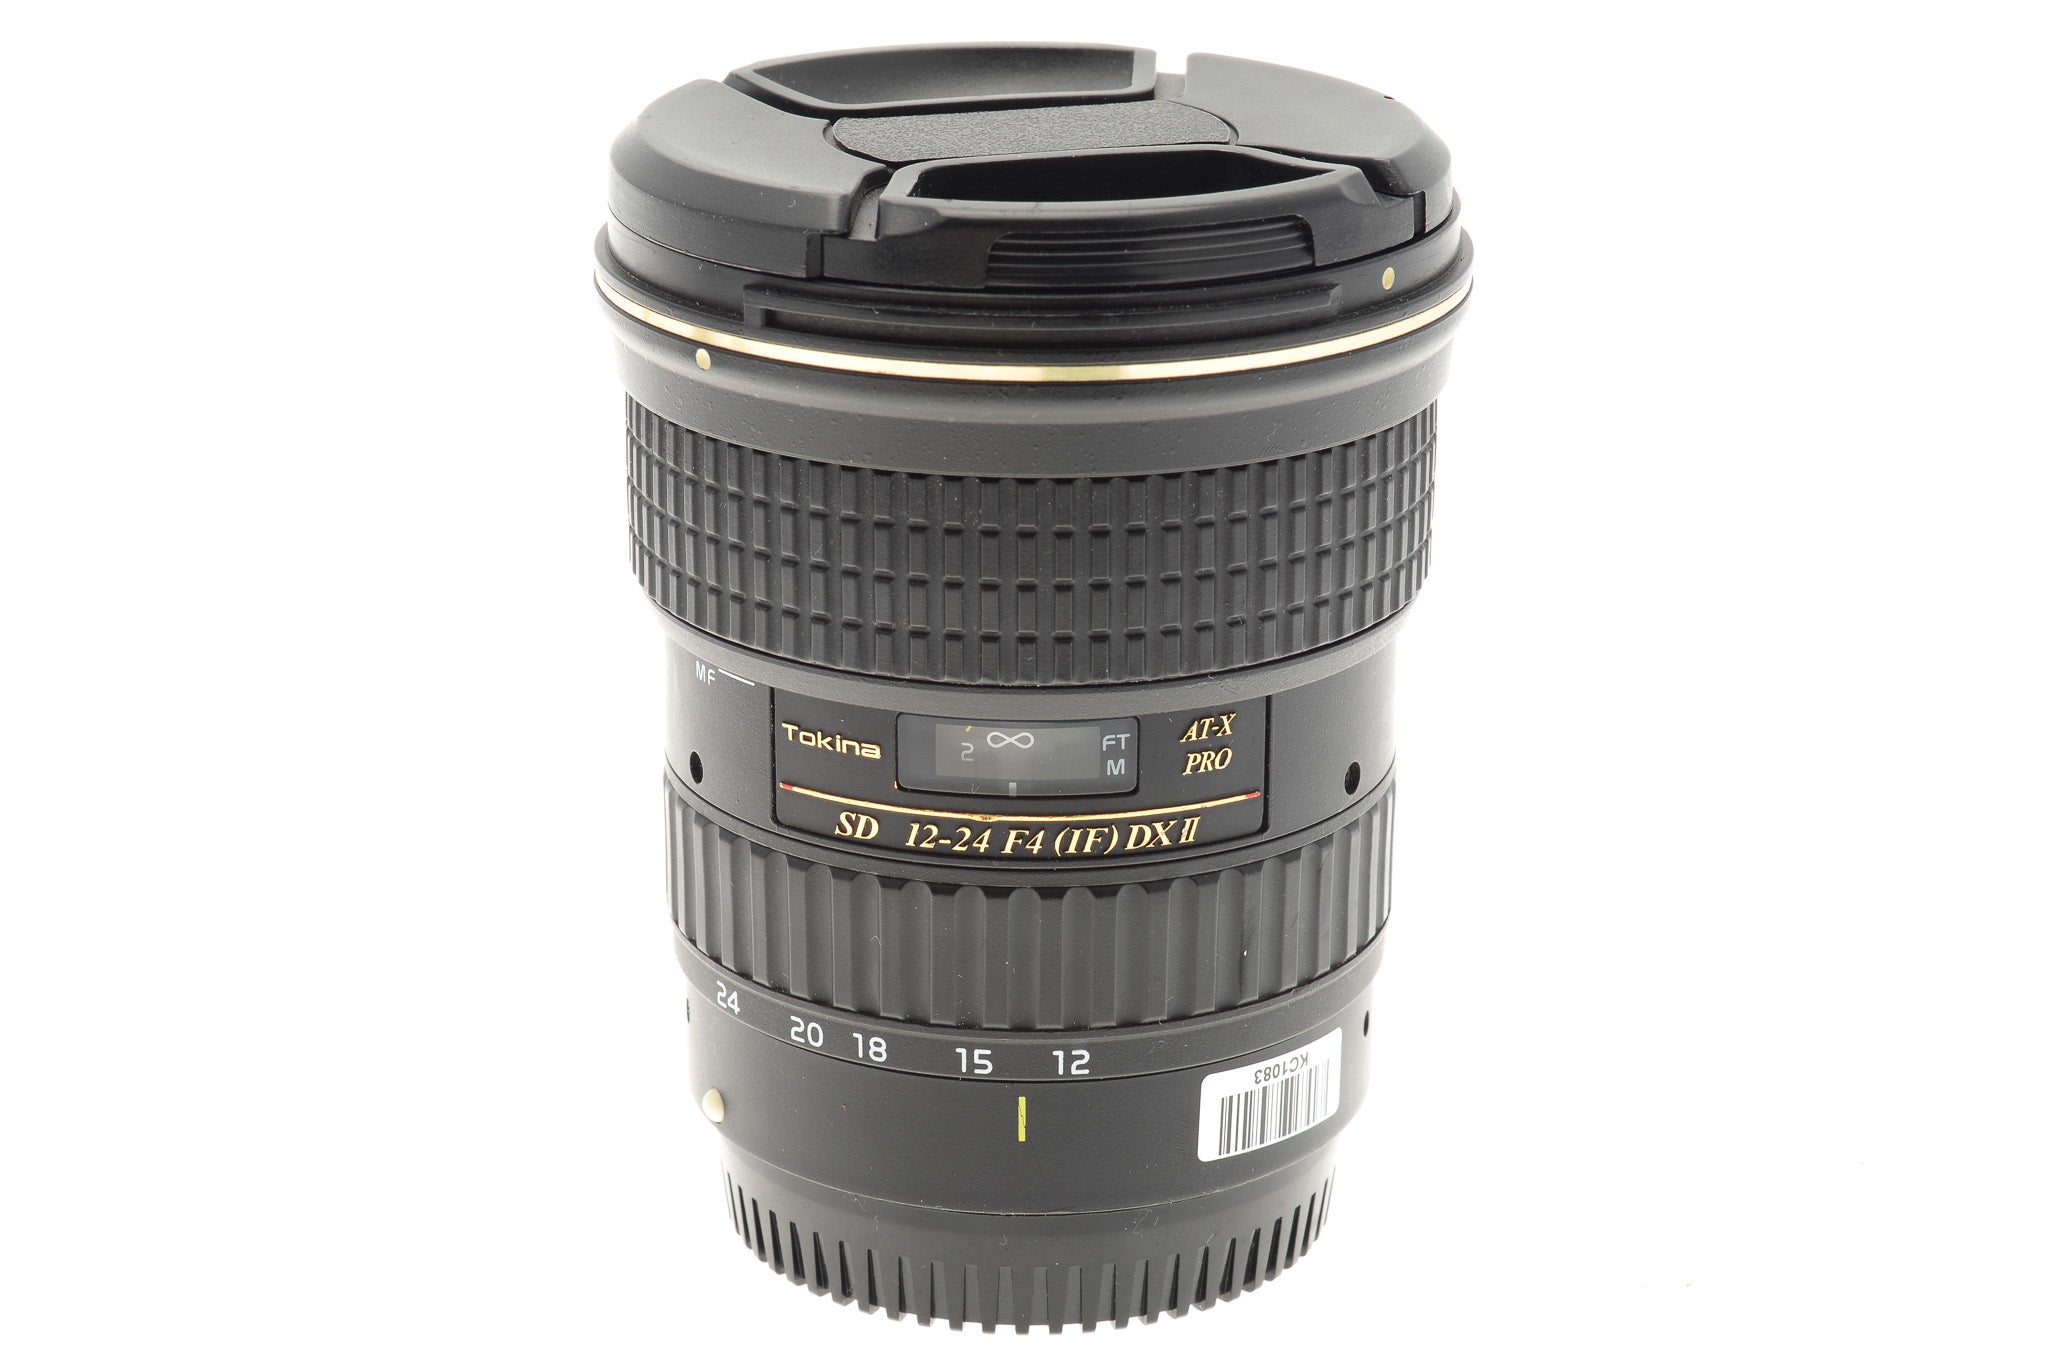 Tokina 12-24mm f4 AT-X Pro SD IF DX II - Lens